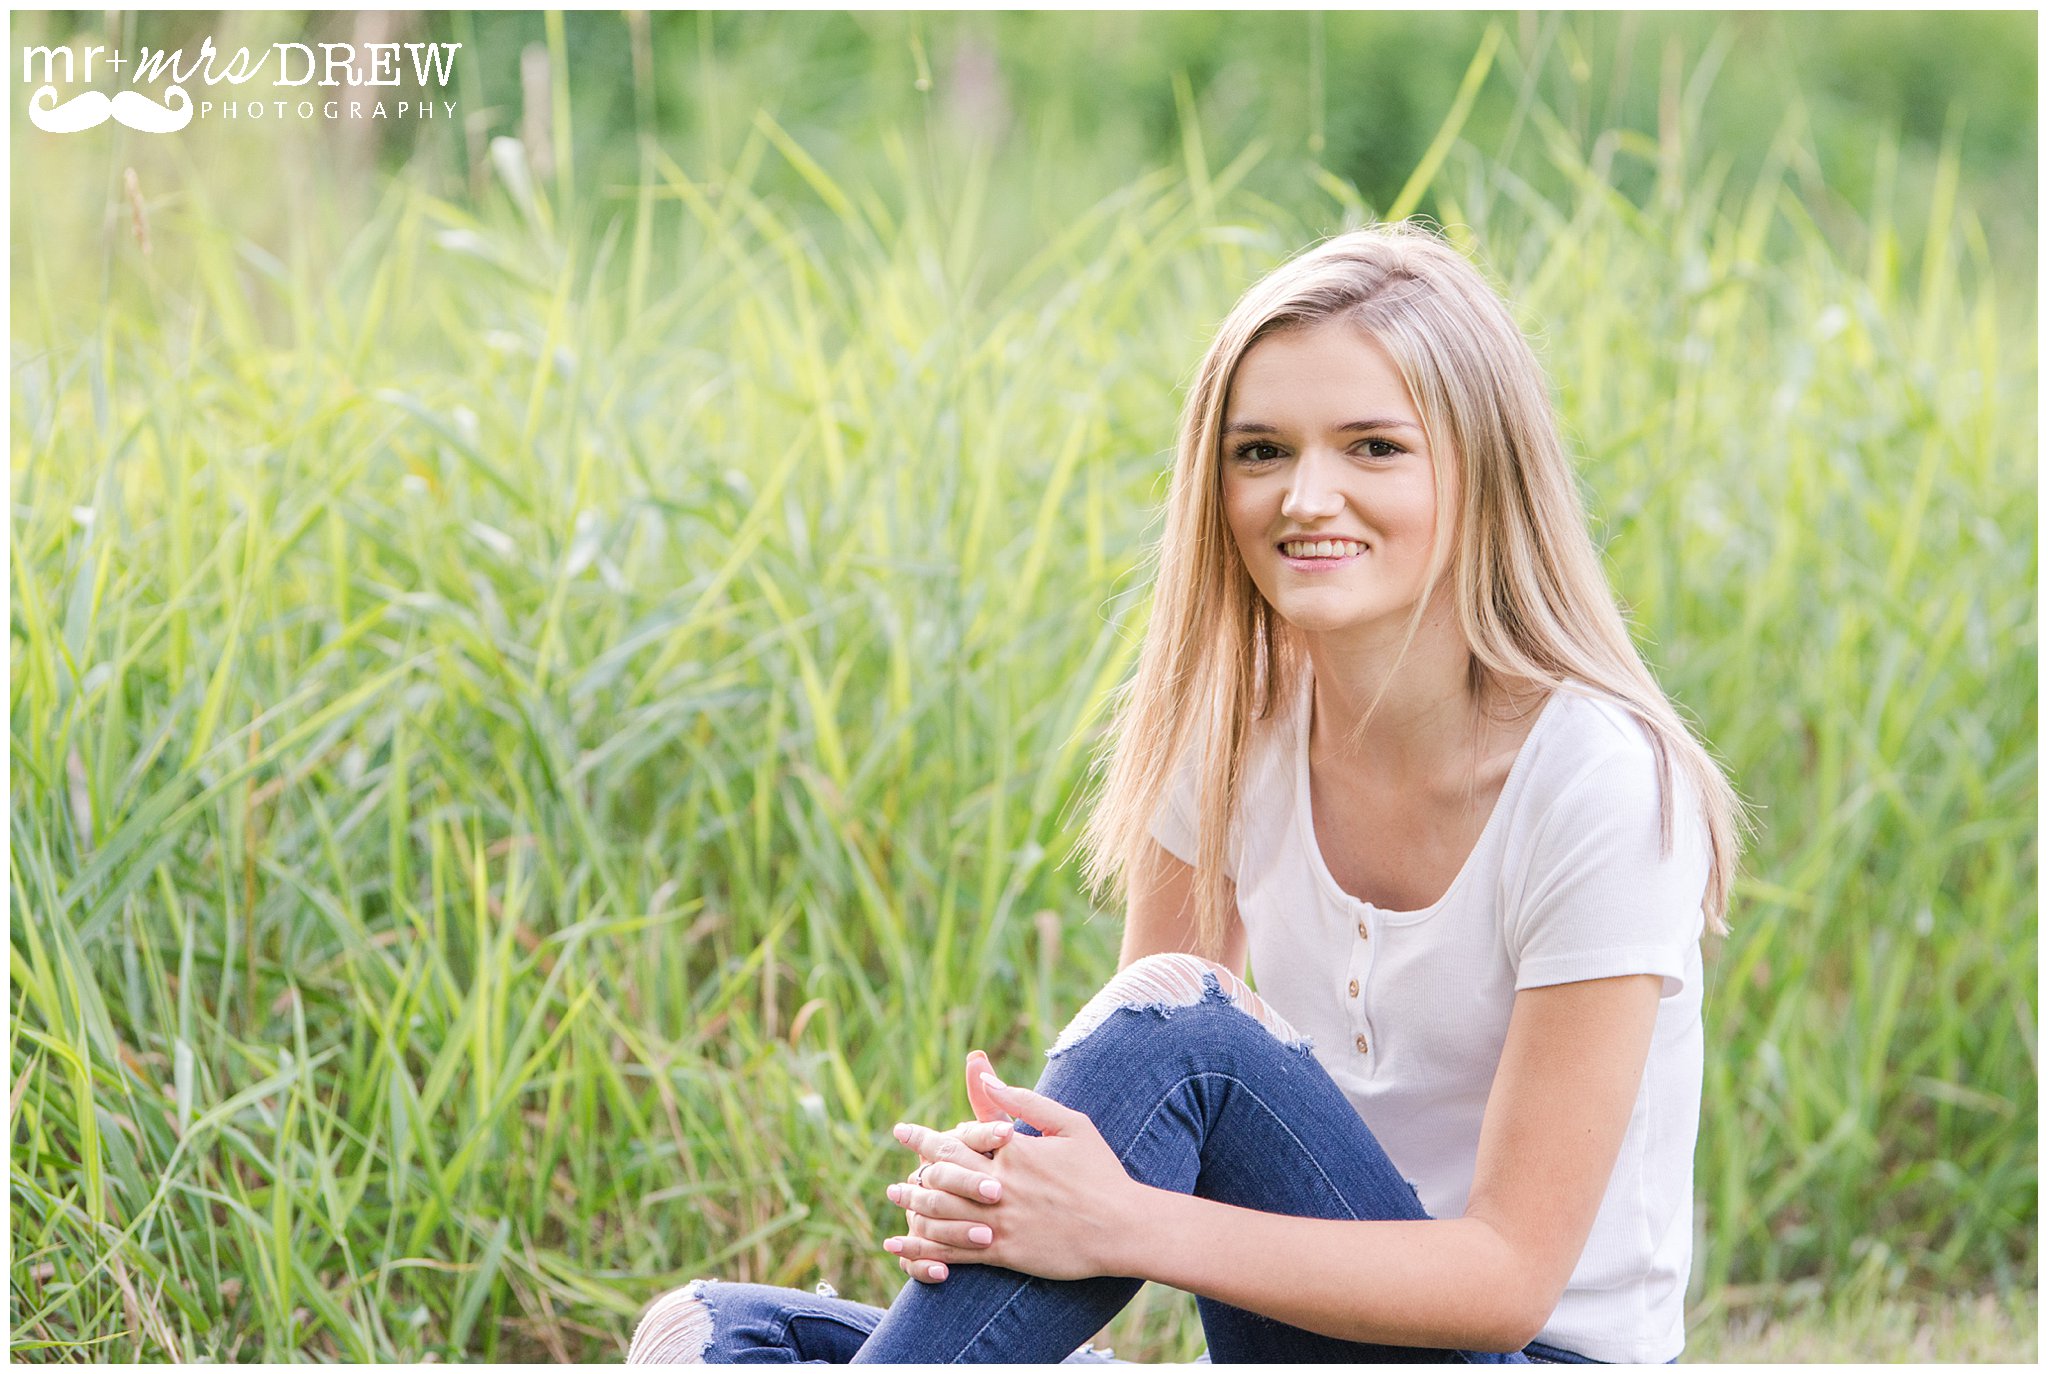 Senior Portrait of girl in white t-shirt & ripped jeans sitting in grass.